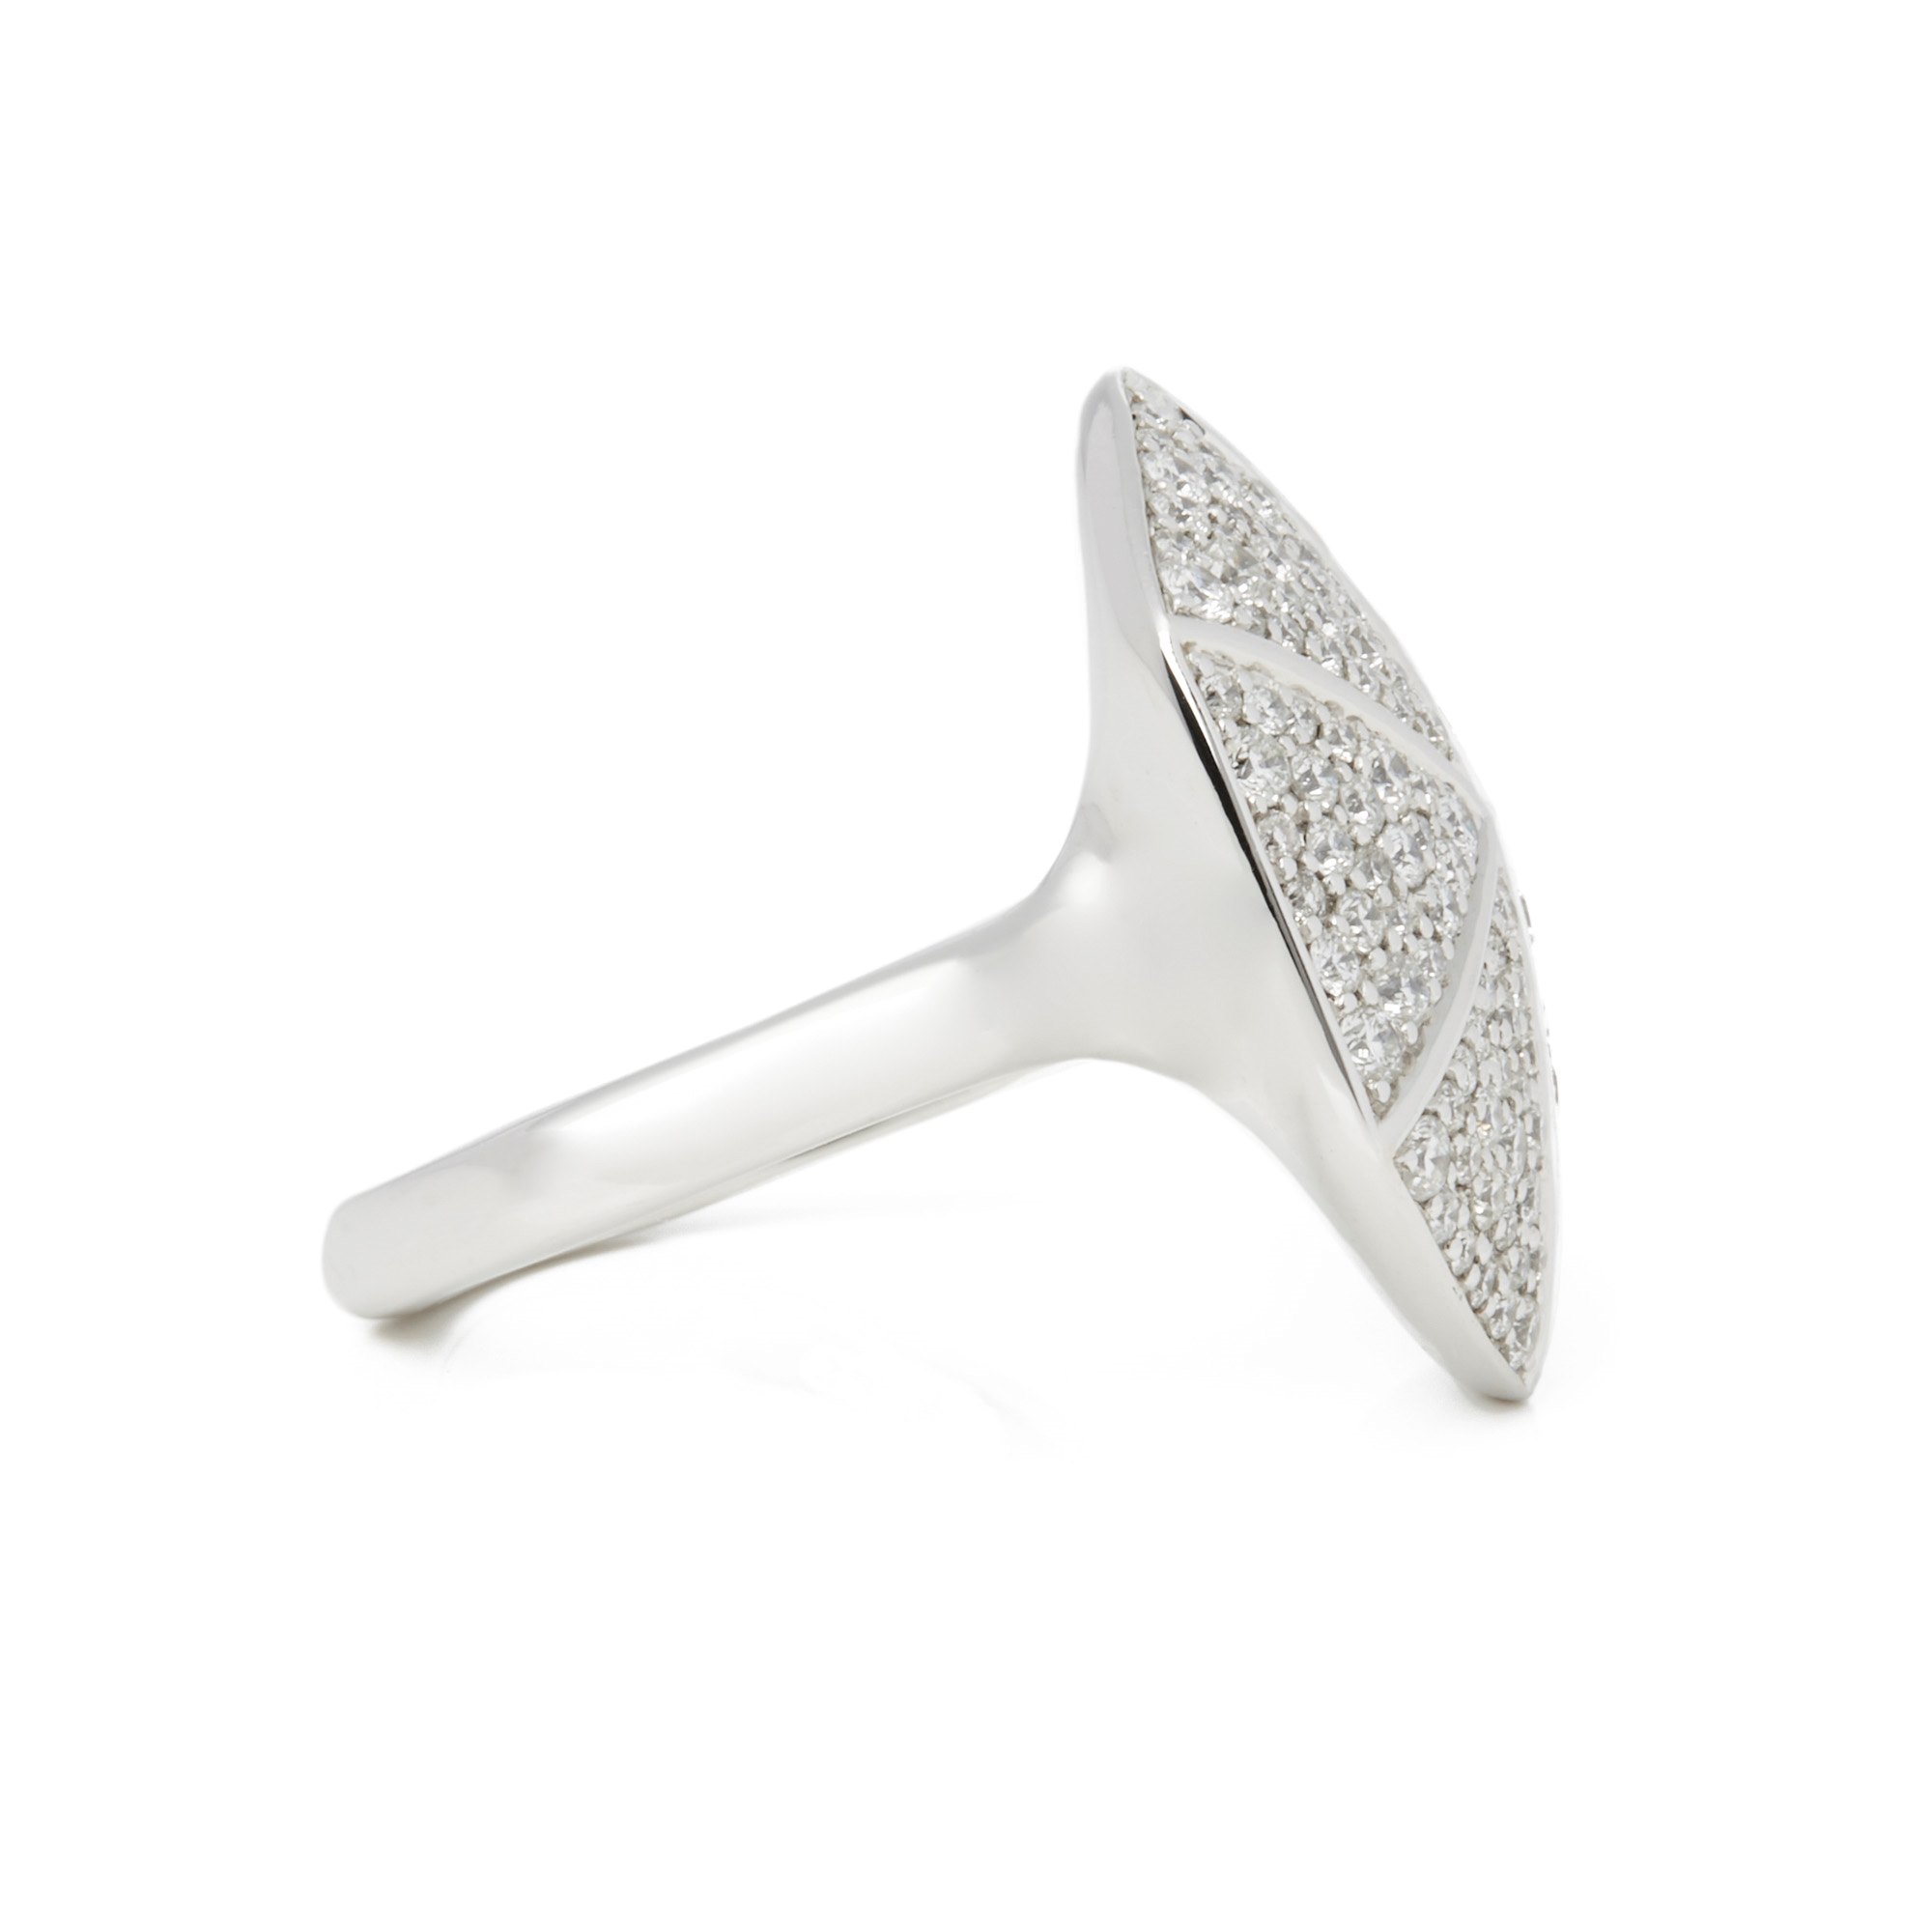 Stephen Webster Deco Pave Diamond RIng